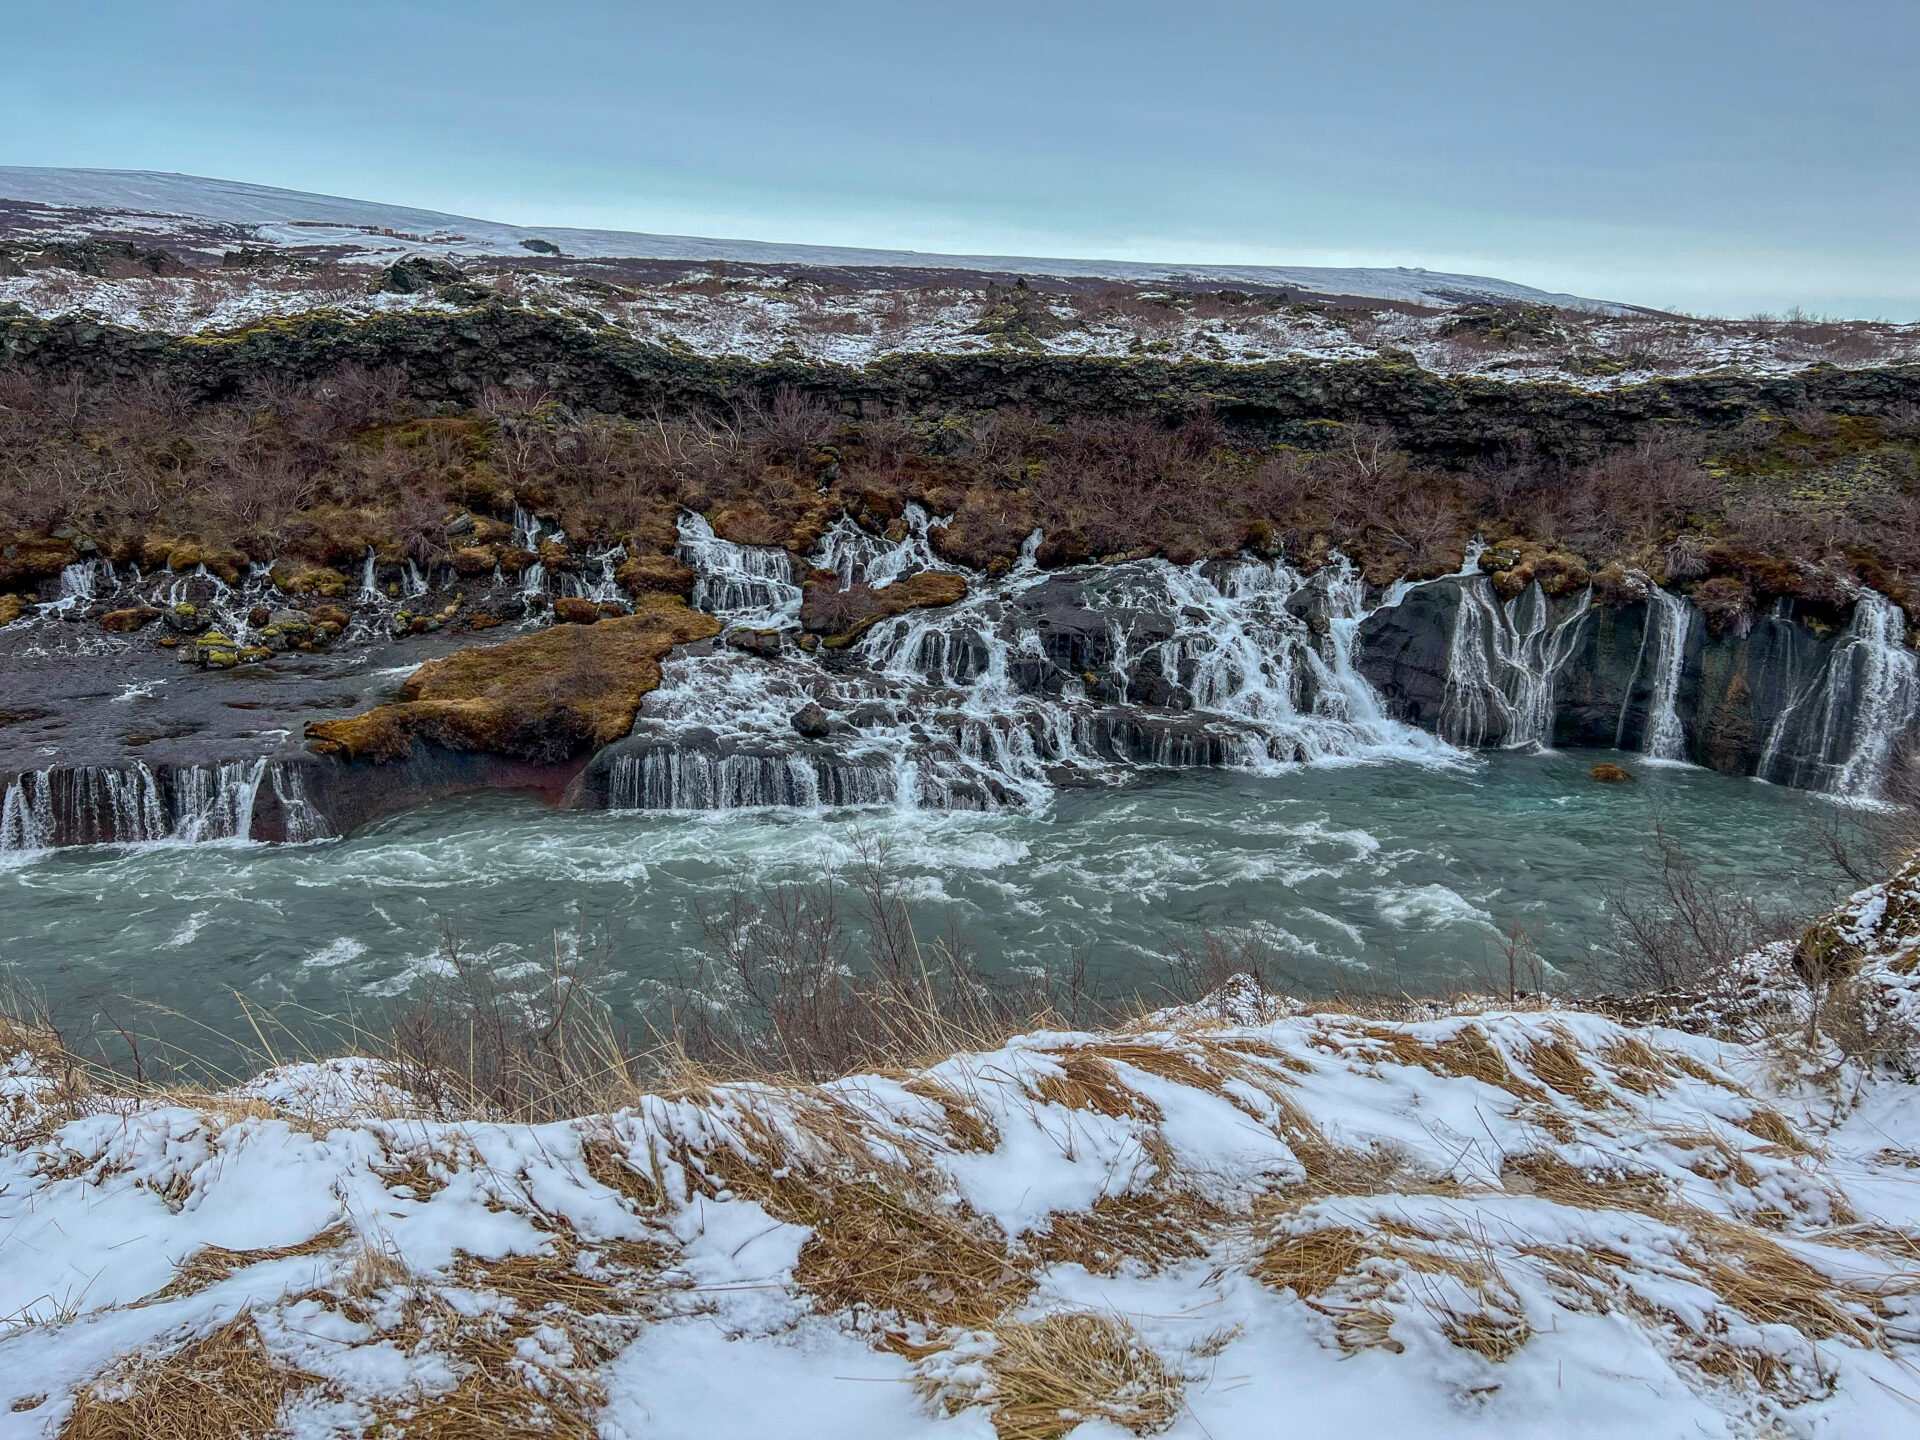 Iceland in the winter. Image from Adventures With TuckNae